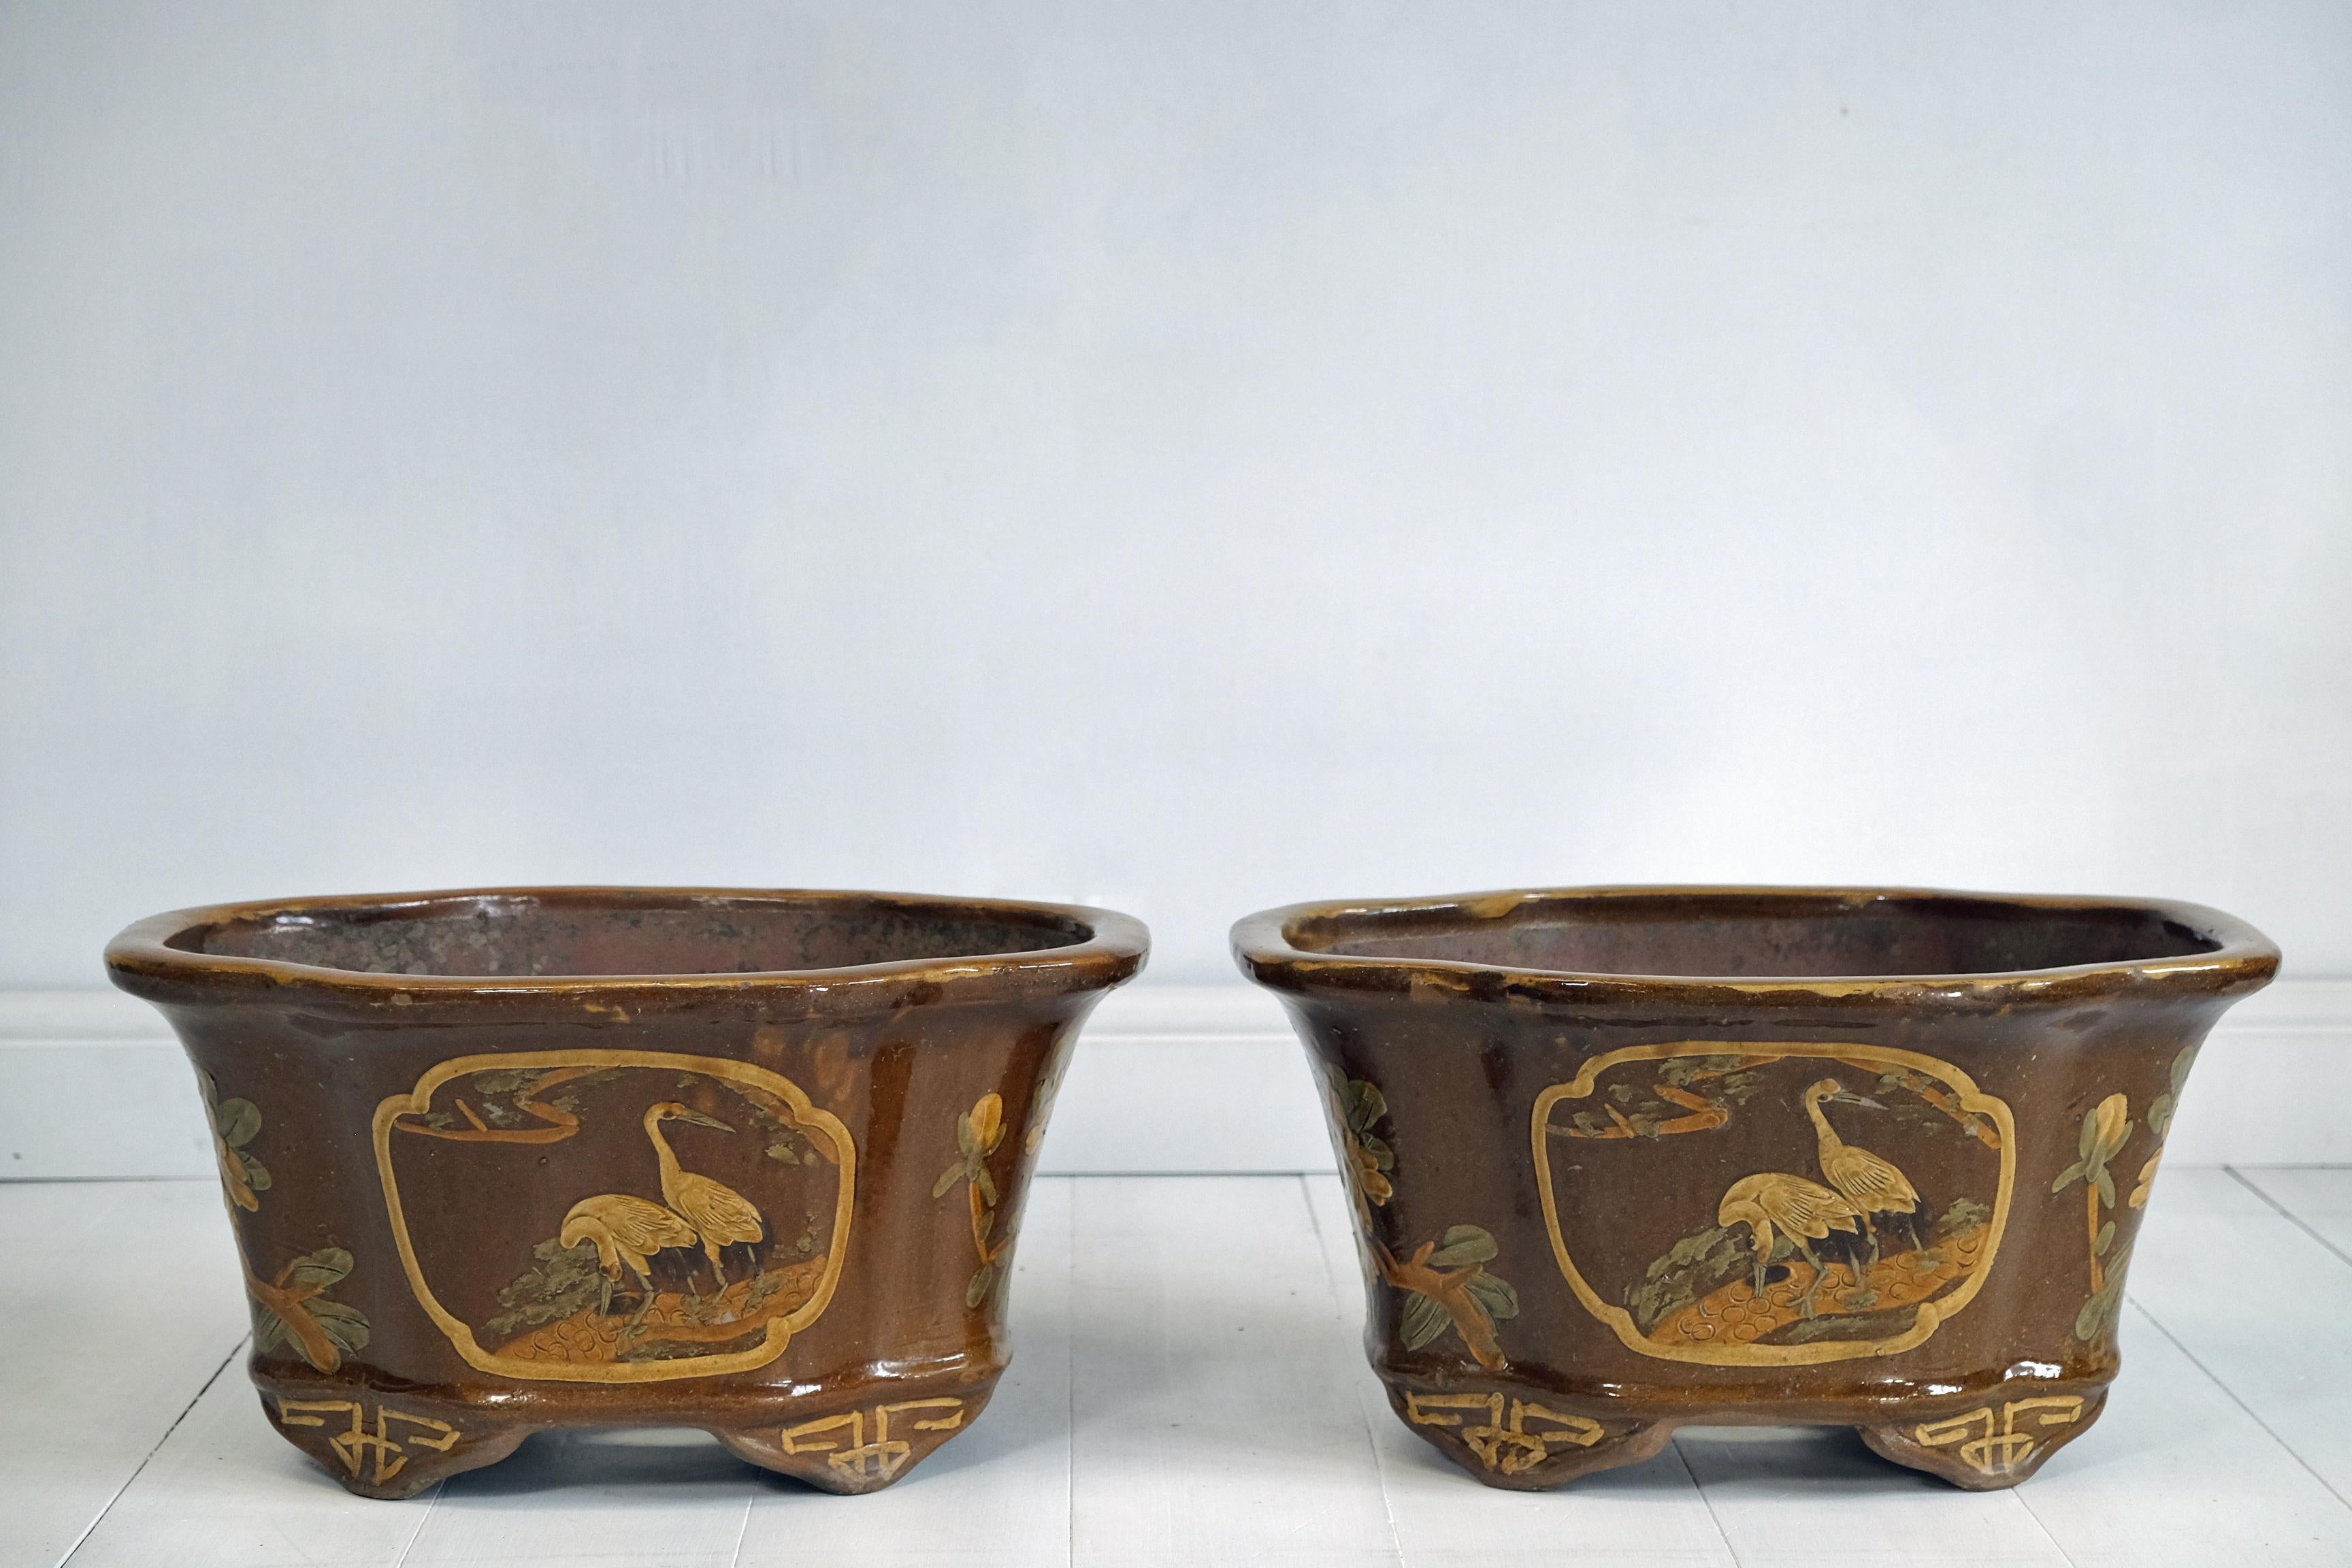 Chinese Export Large Chinese Glazed Terracotta Planters, Urns, Mid-20th Century, Garden Outdoor